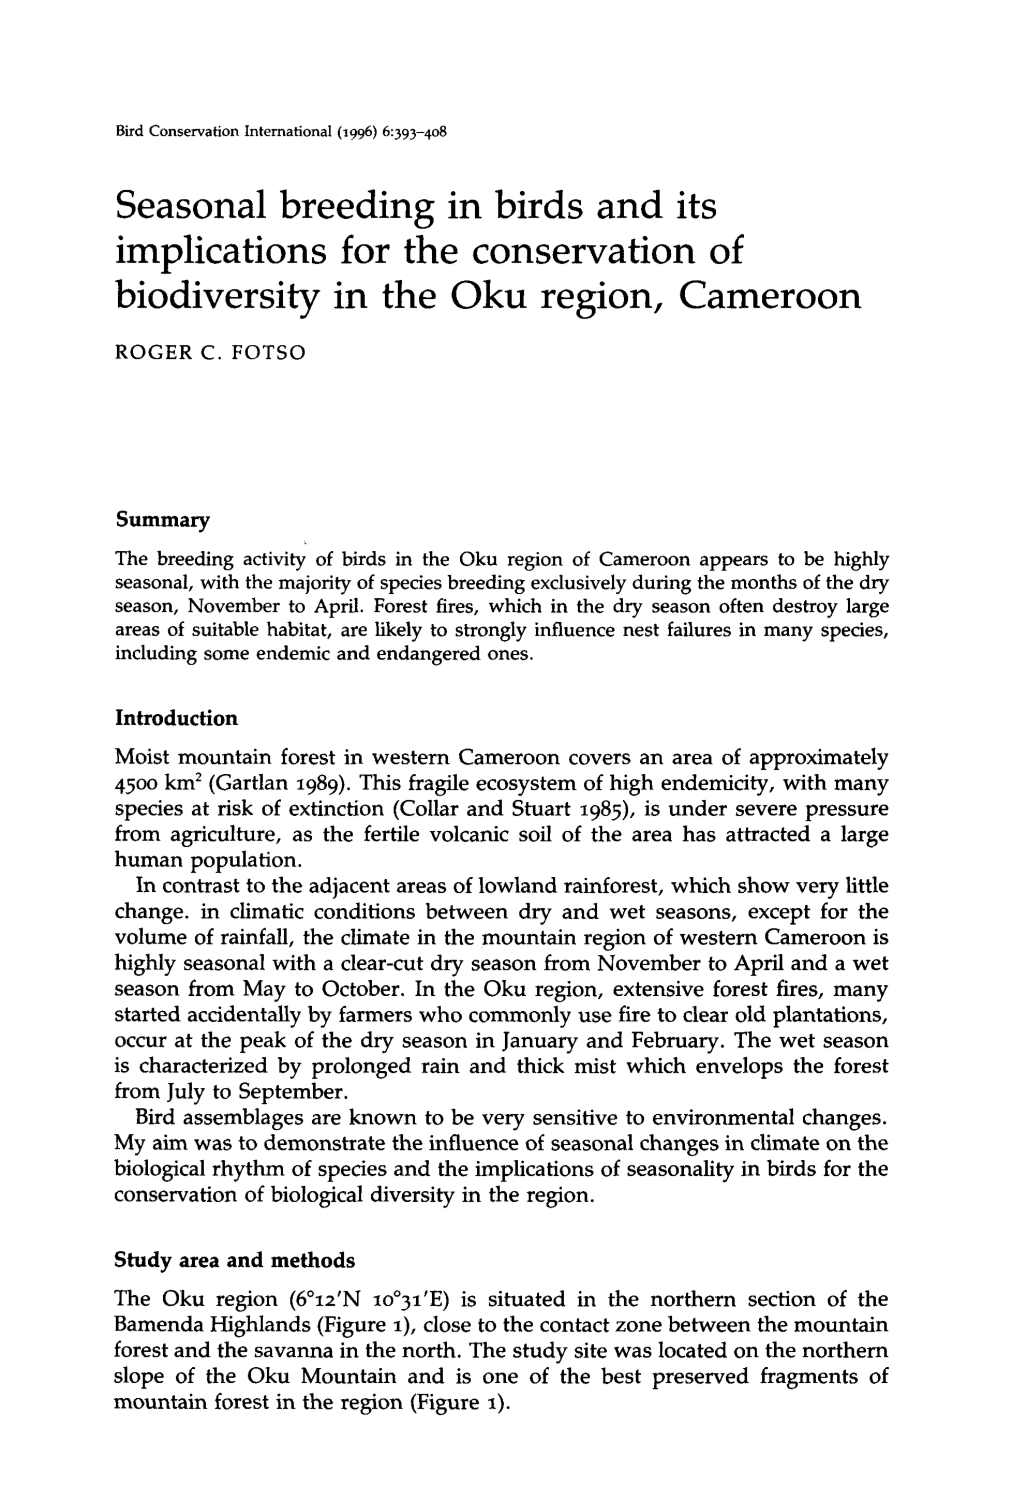 Seasonal Breeding in Birds and Its Implications for the Conservation of Biodiversity in the Oku Region, Cameroon